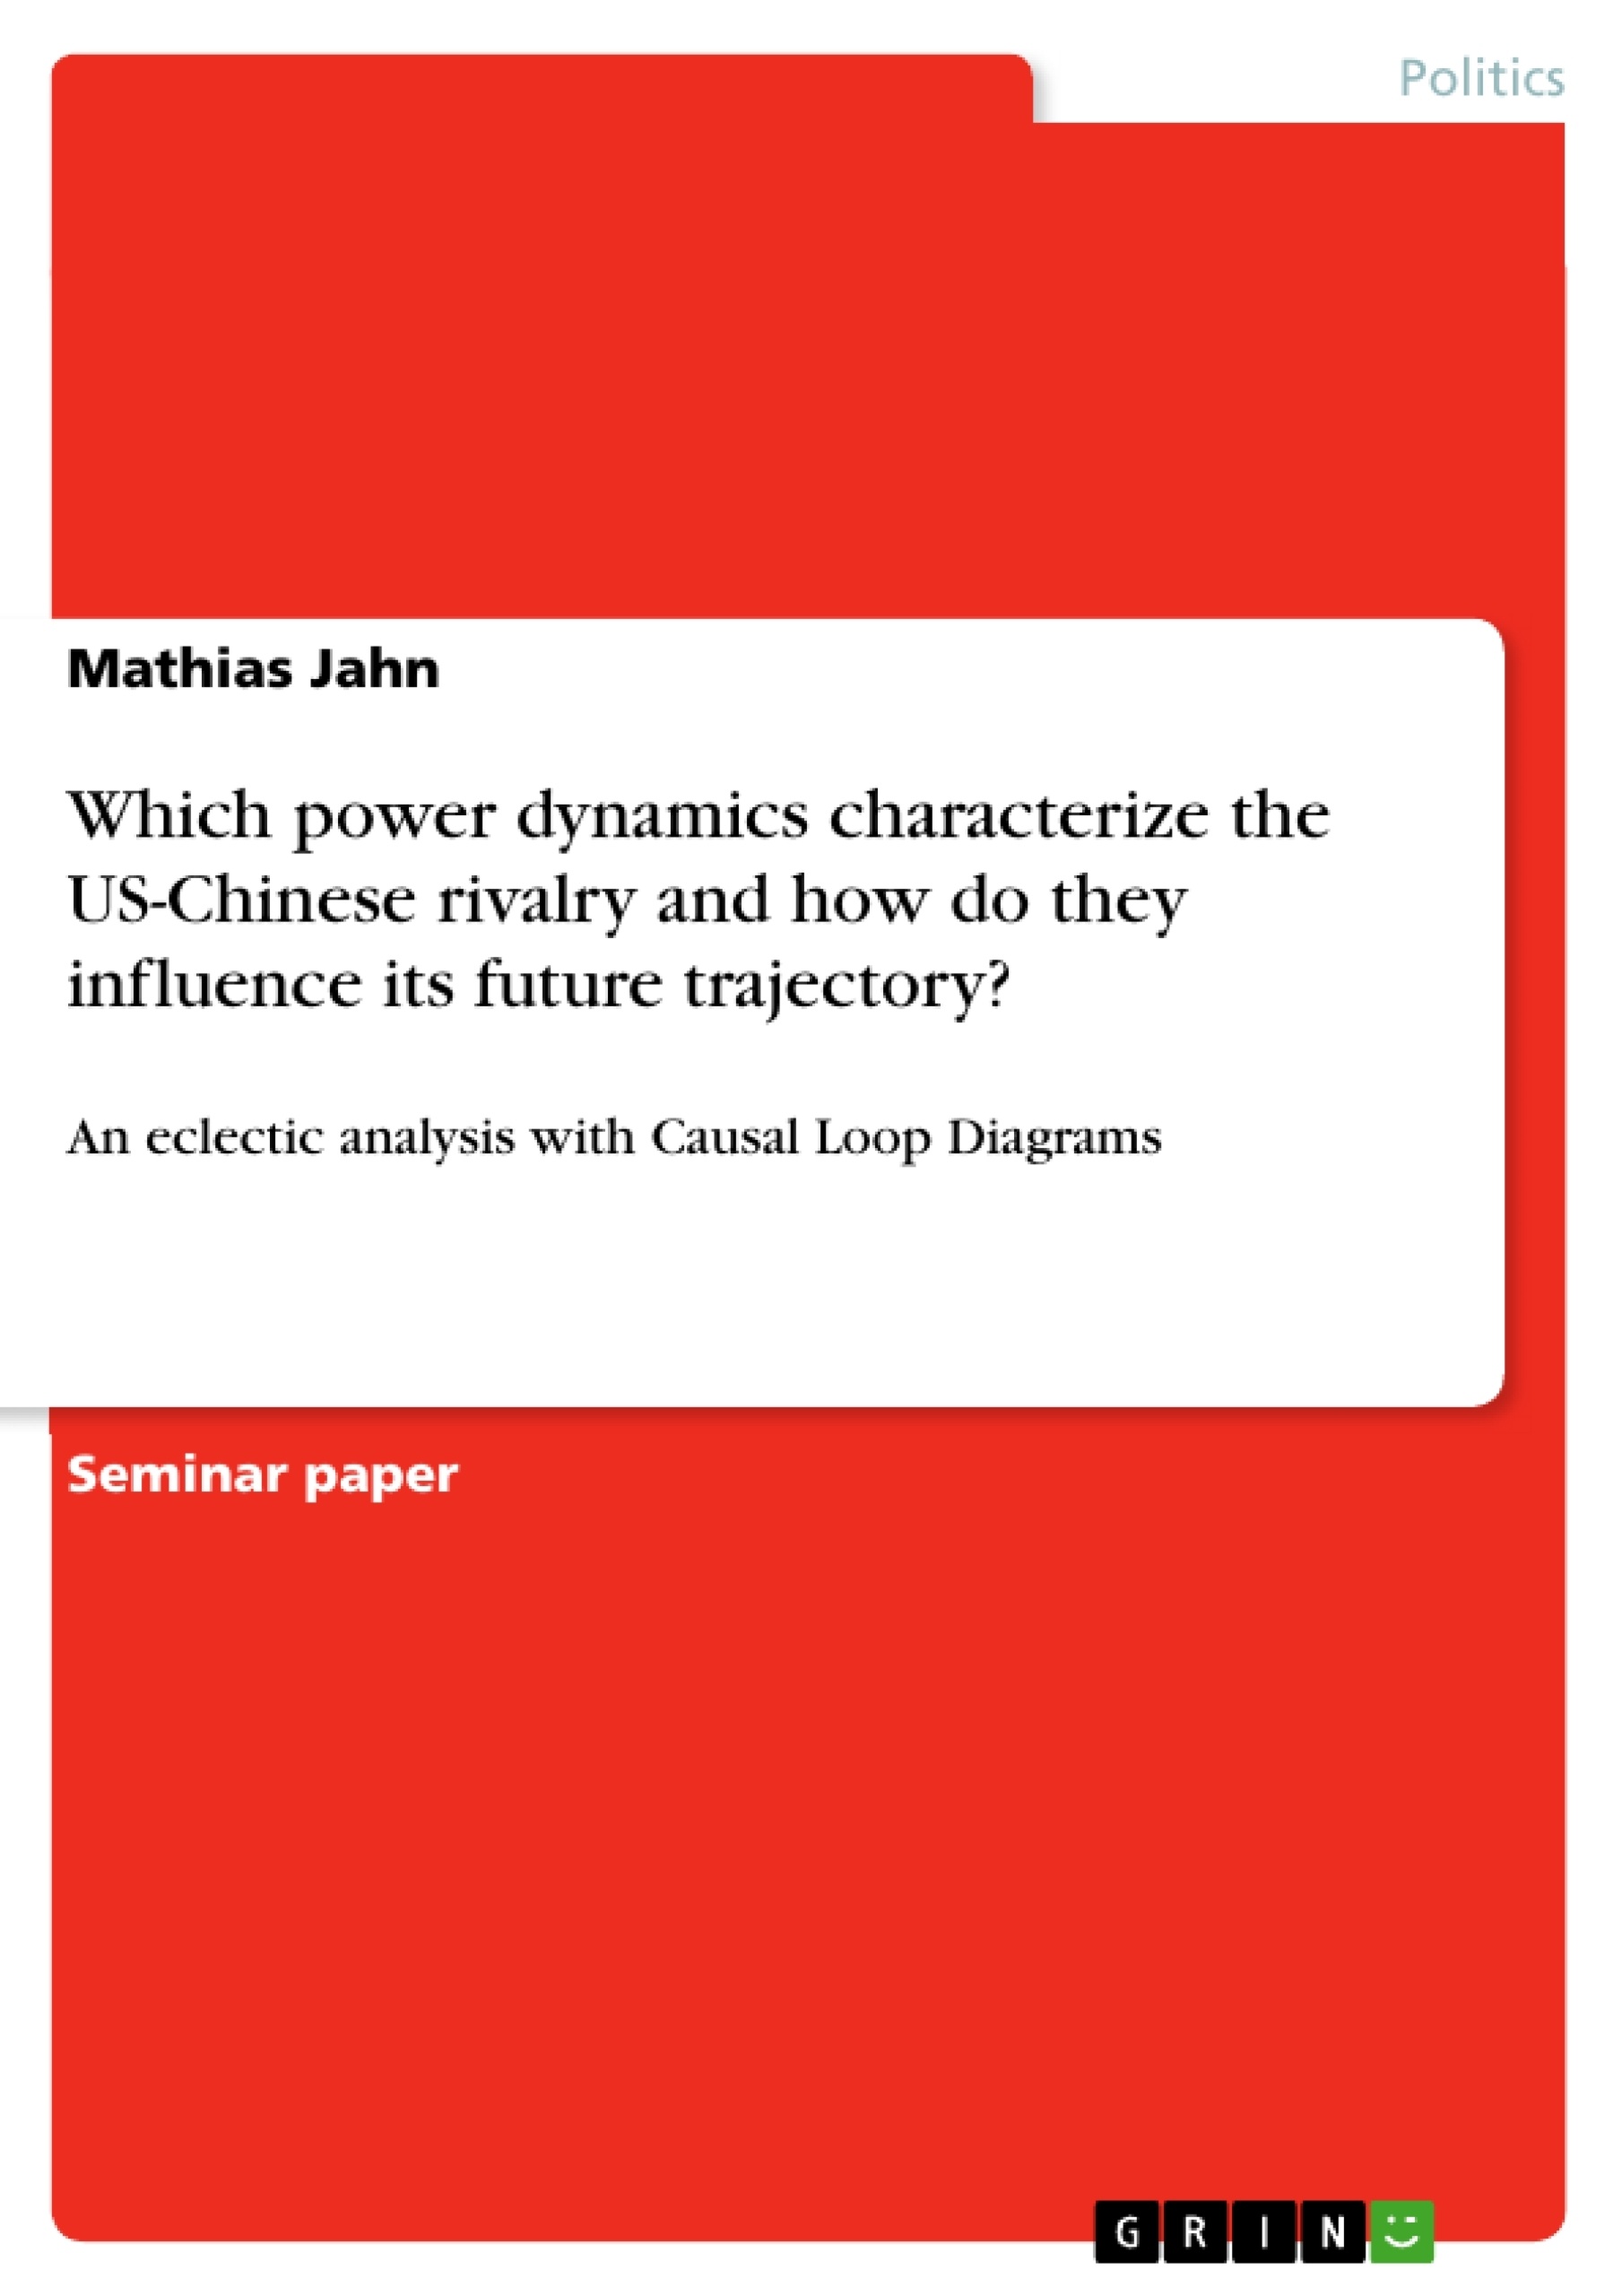 Title: Which power dynamics characterize the US-Chinese rivalry and how do they influence its future trajectory?